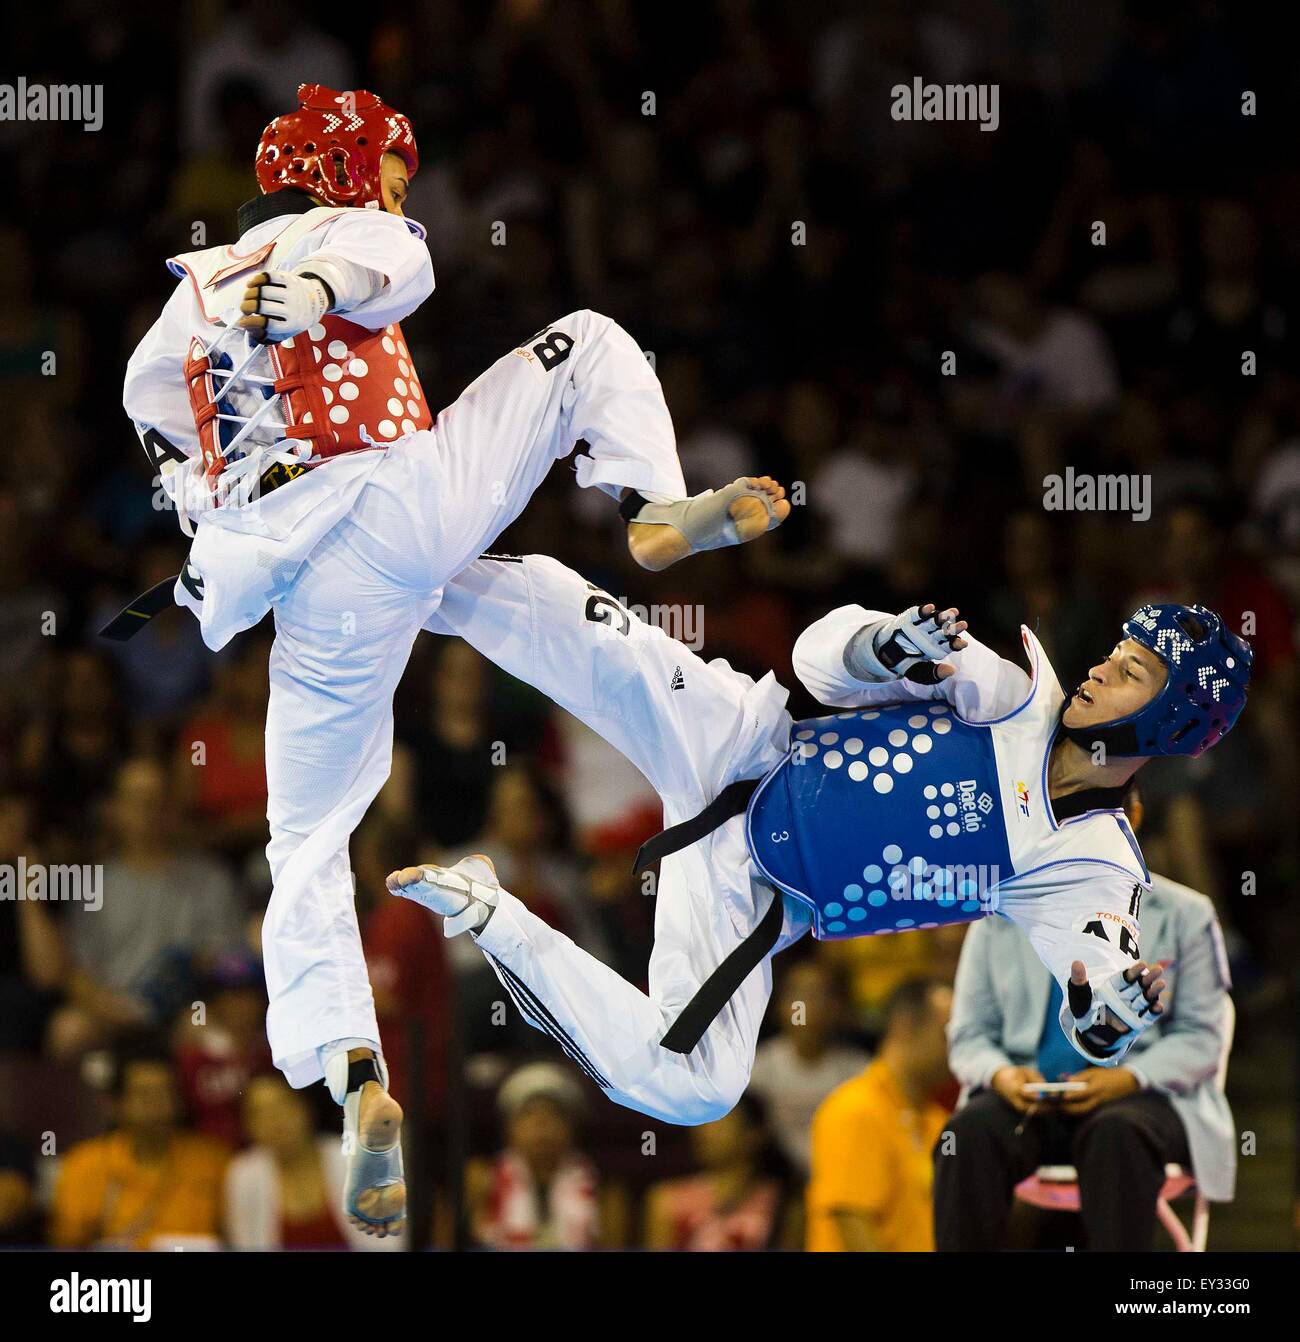 (150721) -- TORONTO, July 21, 2015(Xinhua) -- Lucas Guzman(R) of Argentina competes with Venilton Torres of Brazil during the men's -58kg bronze medal match of the taekwondo event at the 17th Pan American Games in Toronto, Canada, July 19, 2015. Lucas Guzman won 2-0 and got the bronze medal. (Xinhua/Zou Zheng) Stock Photo